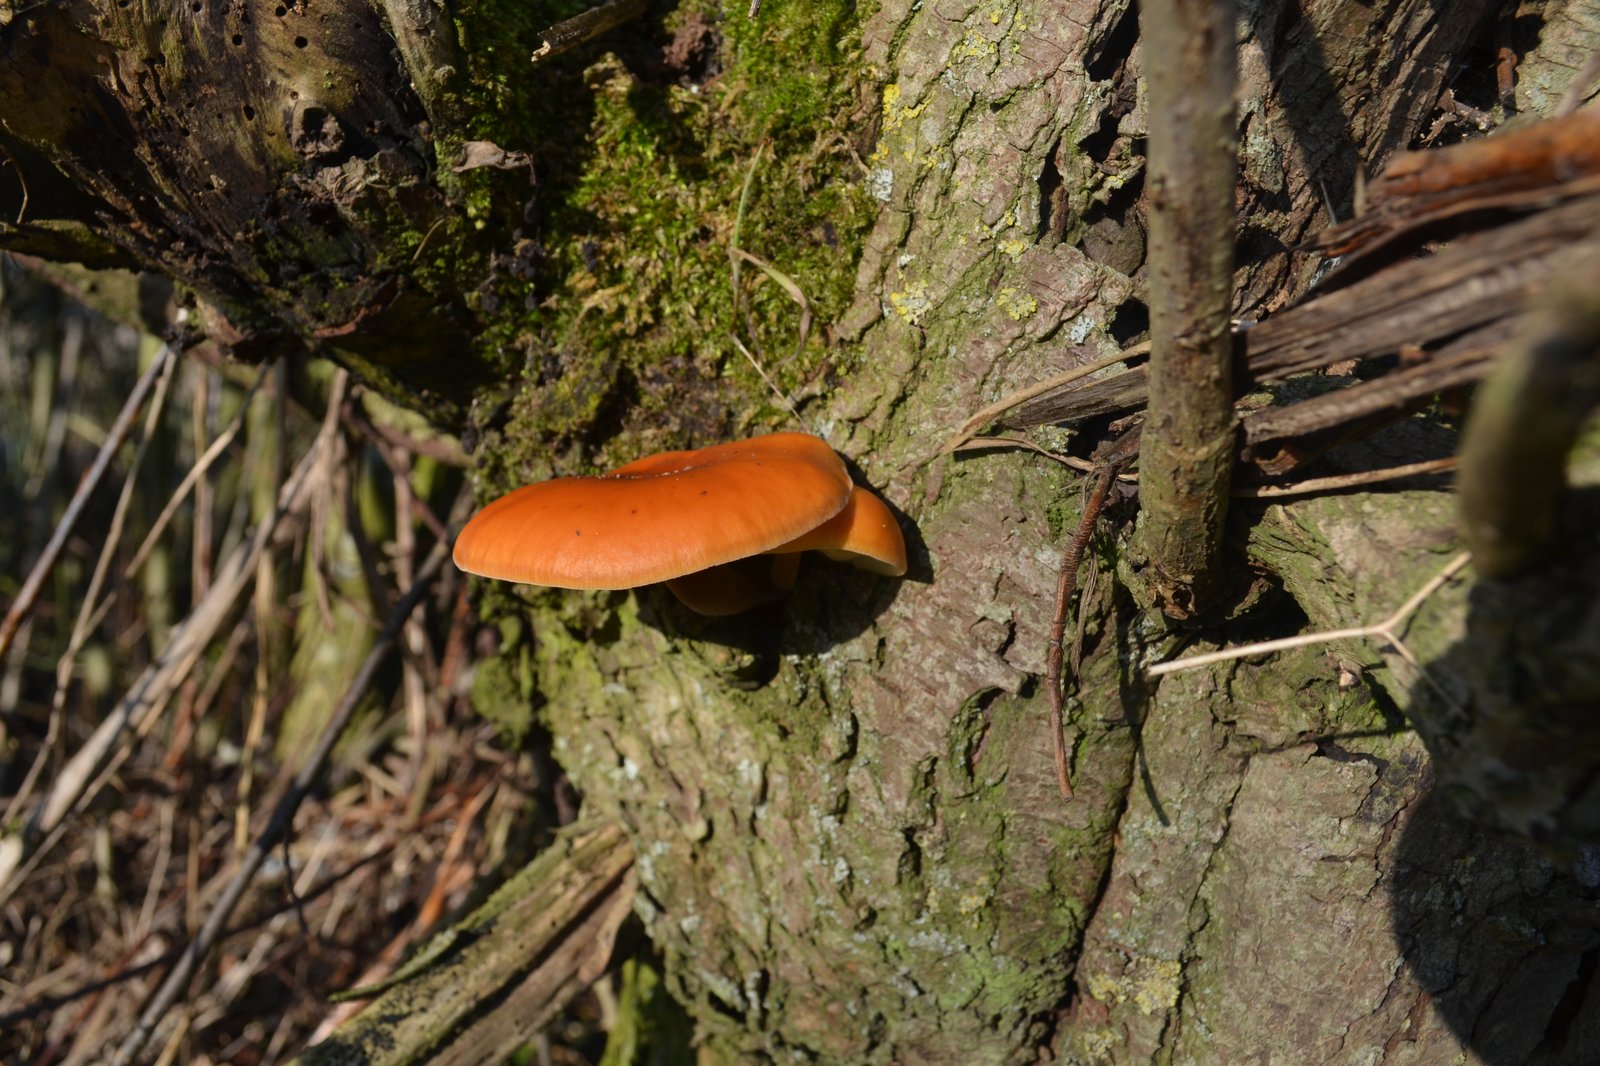 large orange mushroom growing out of a tree trunk